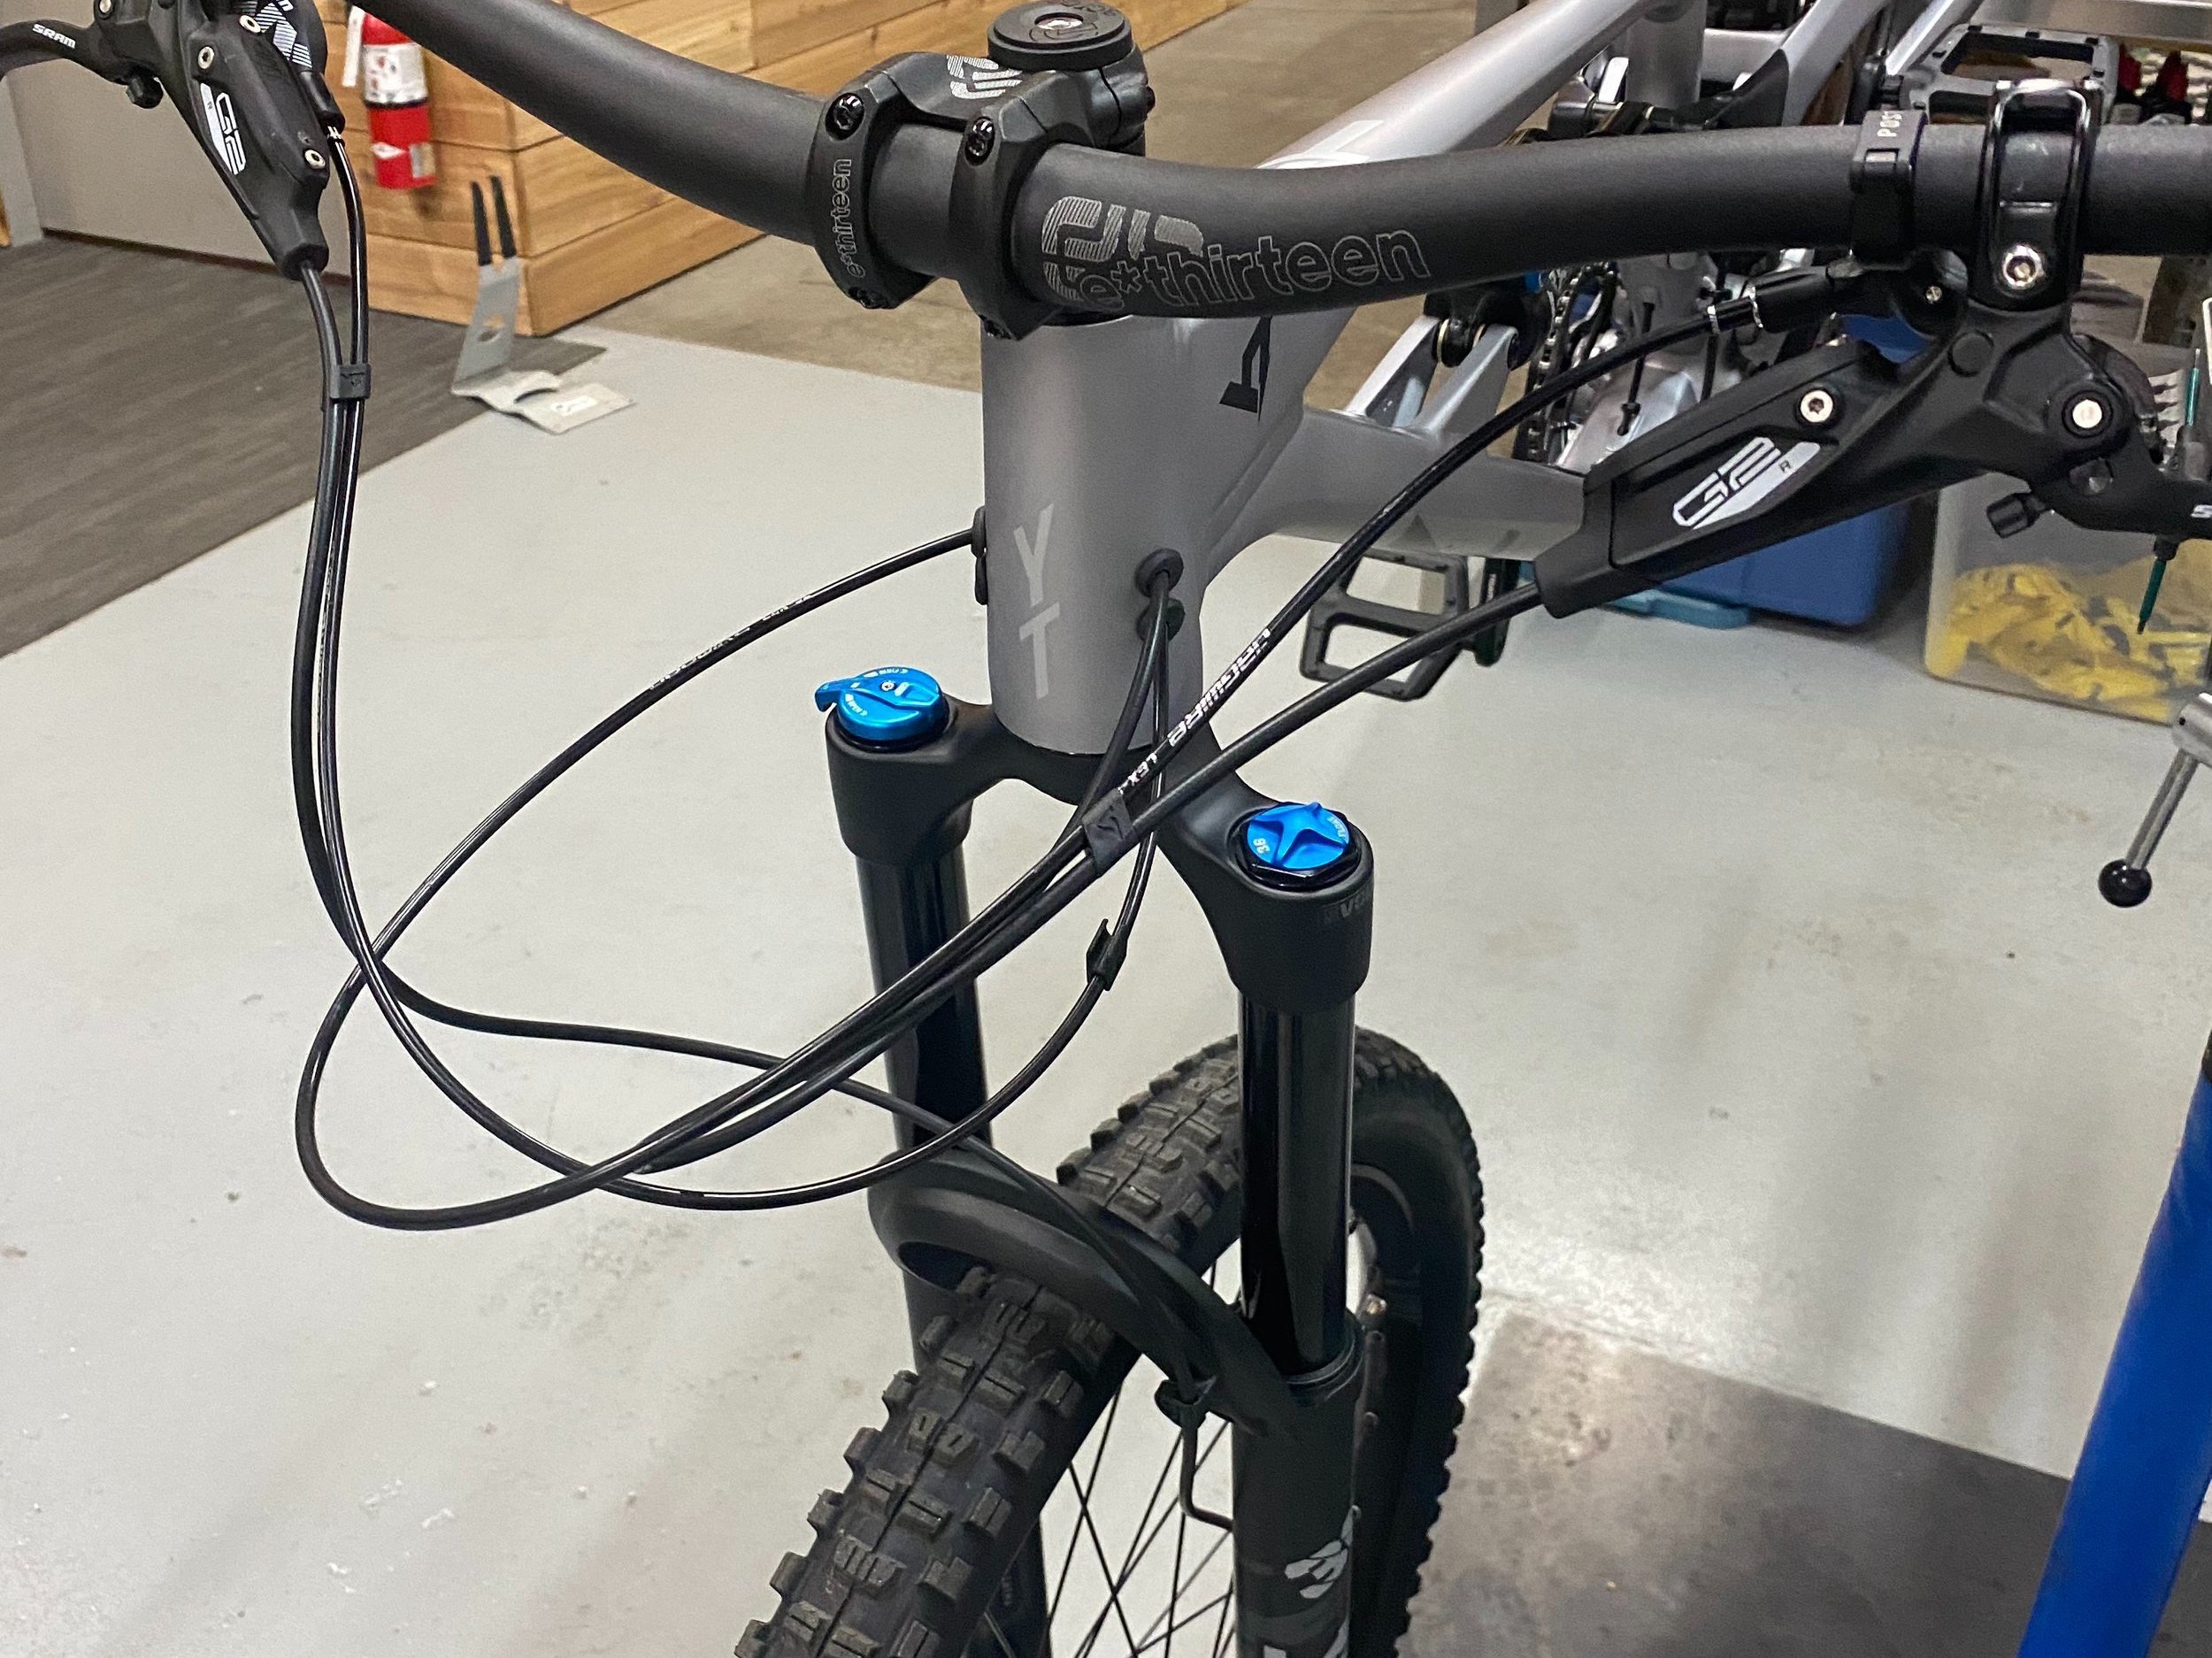  this cable work won’t do. often new bikes come with brake lines that are dangerously long, just waiting to be caught on a tree or ripped open in a crash or while you’re loading your bike onto the shuttle rig. the extra length of hose is also more di